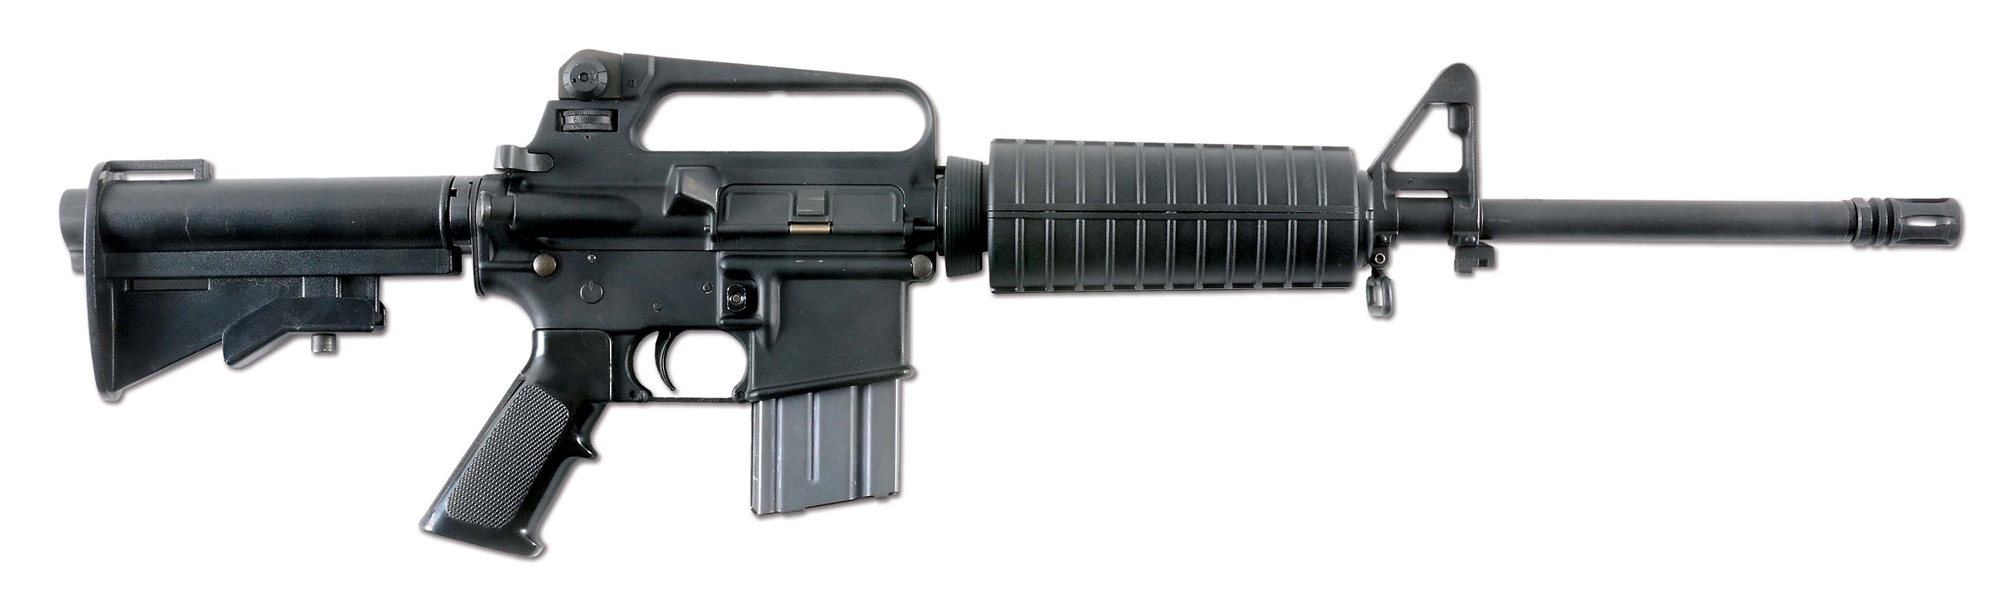 (N) VERY DESIRABLE BUSHMASTER FIREARMS XM1EA2 (M16) MACHINE GUN WITH 20” HEAVY BARREL AND TELESCOPING BUTTSTOCK (FULLY TRANSFERABLE) 